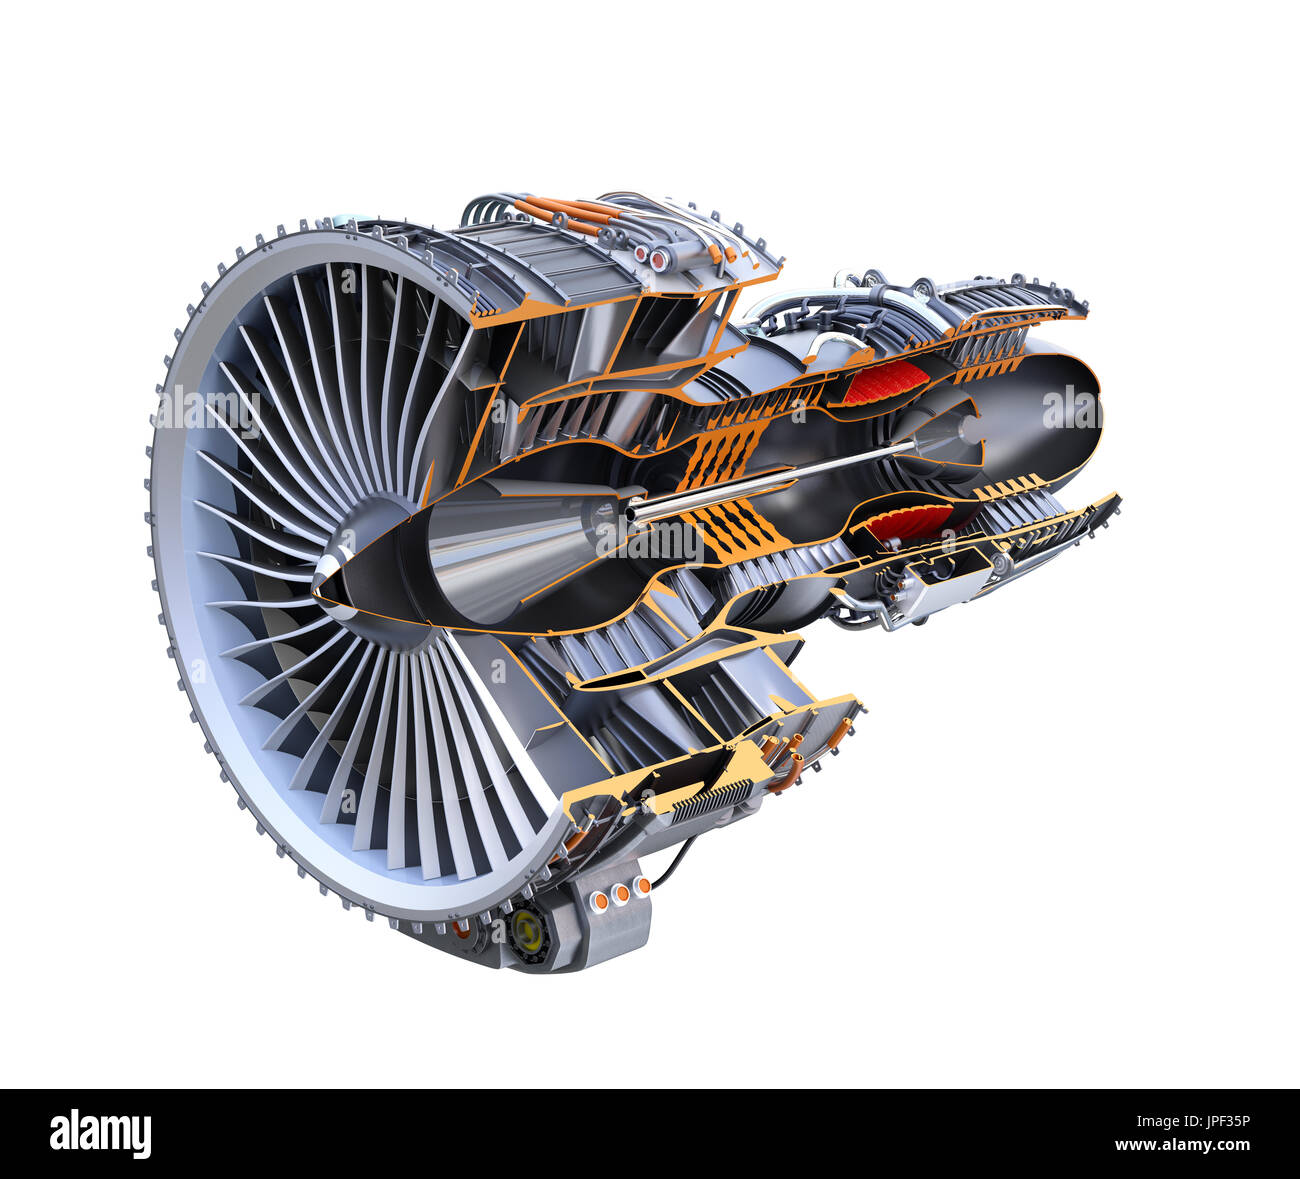 Cross section of turbofan jet engine isolated on white background. 3D rendering image. Stock Photo